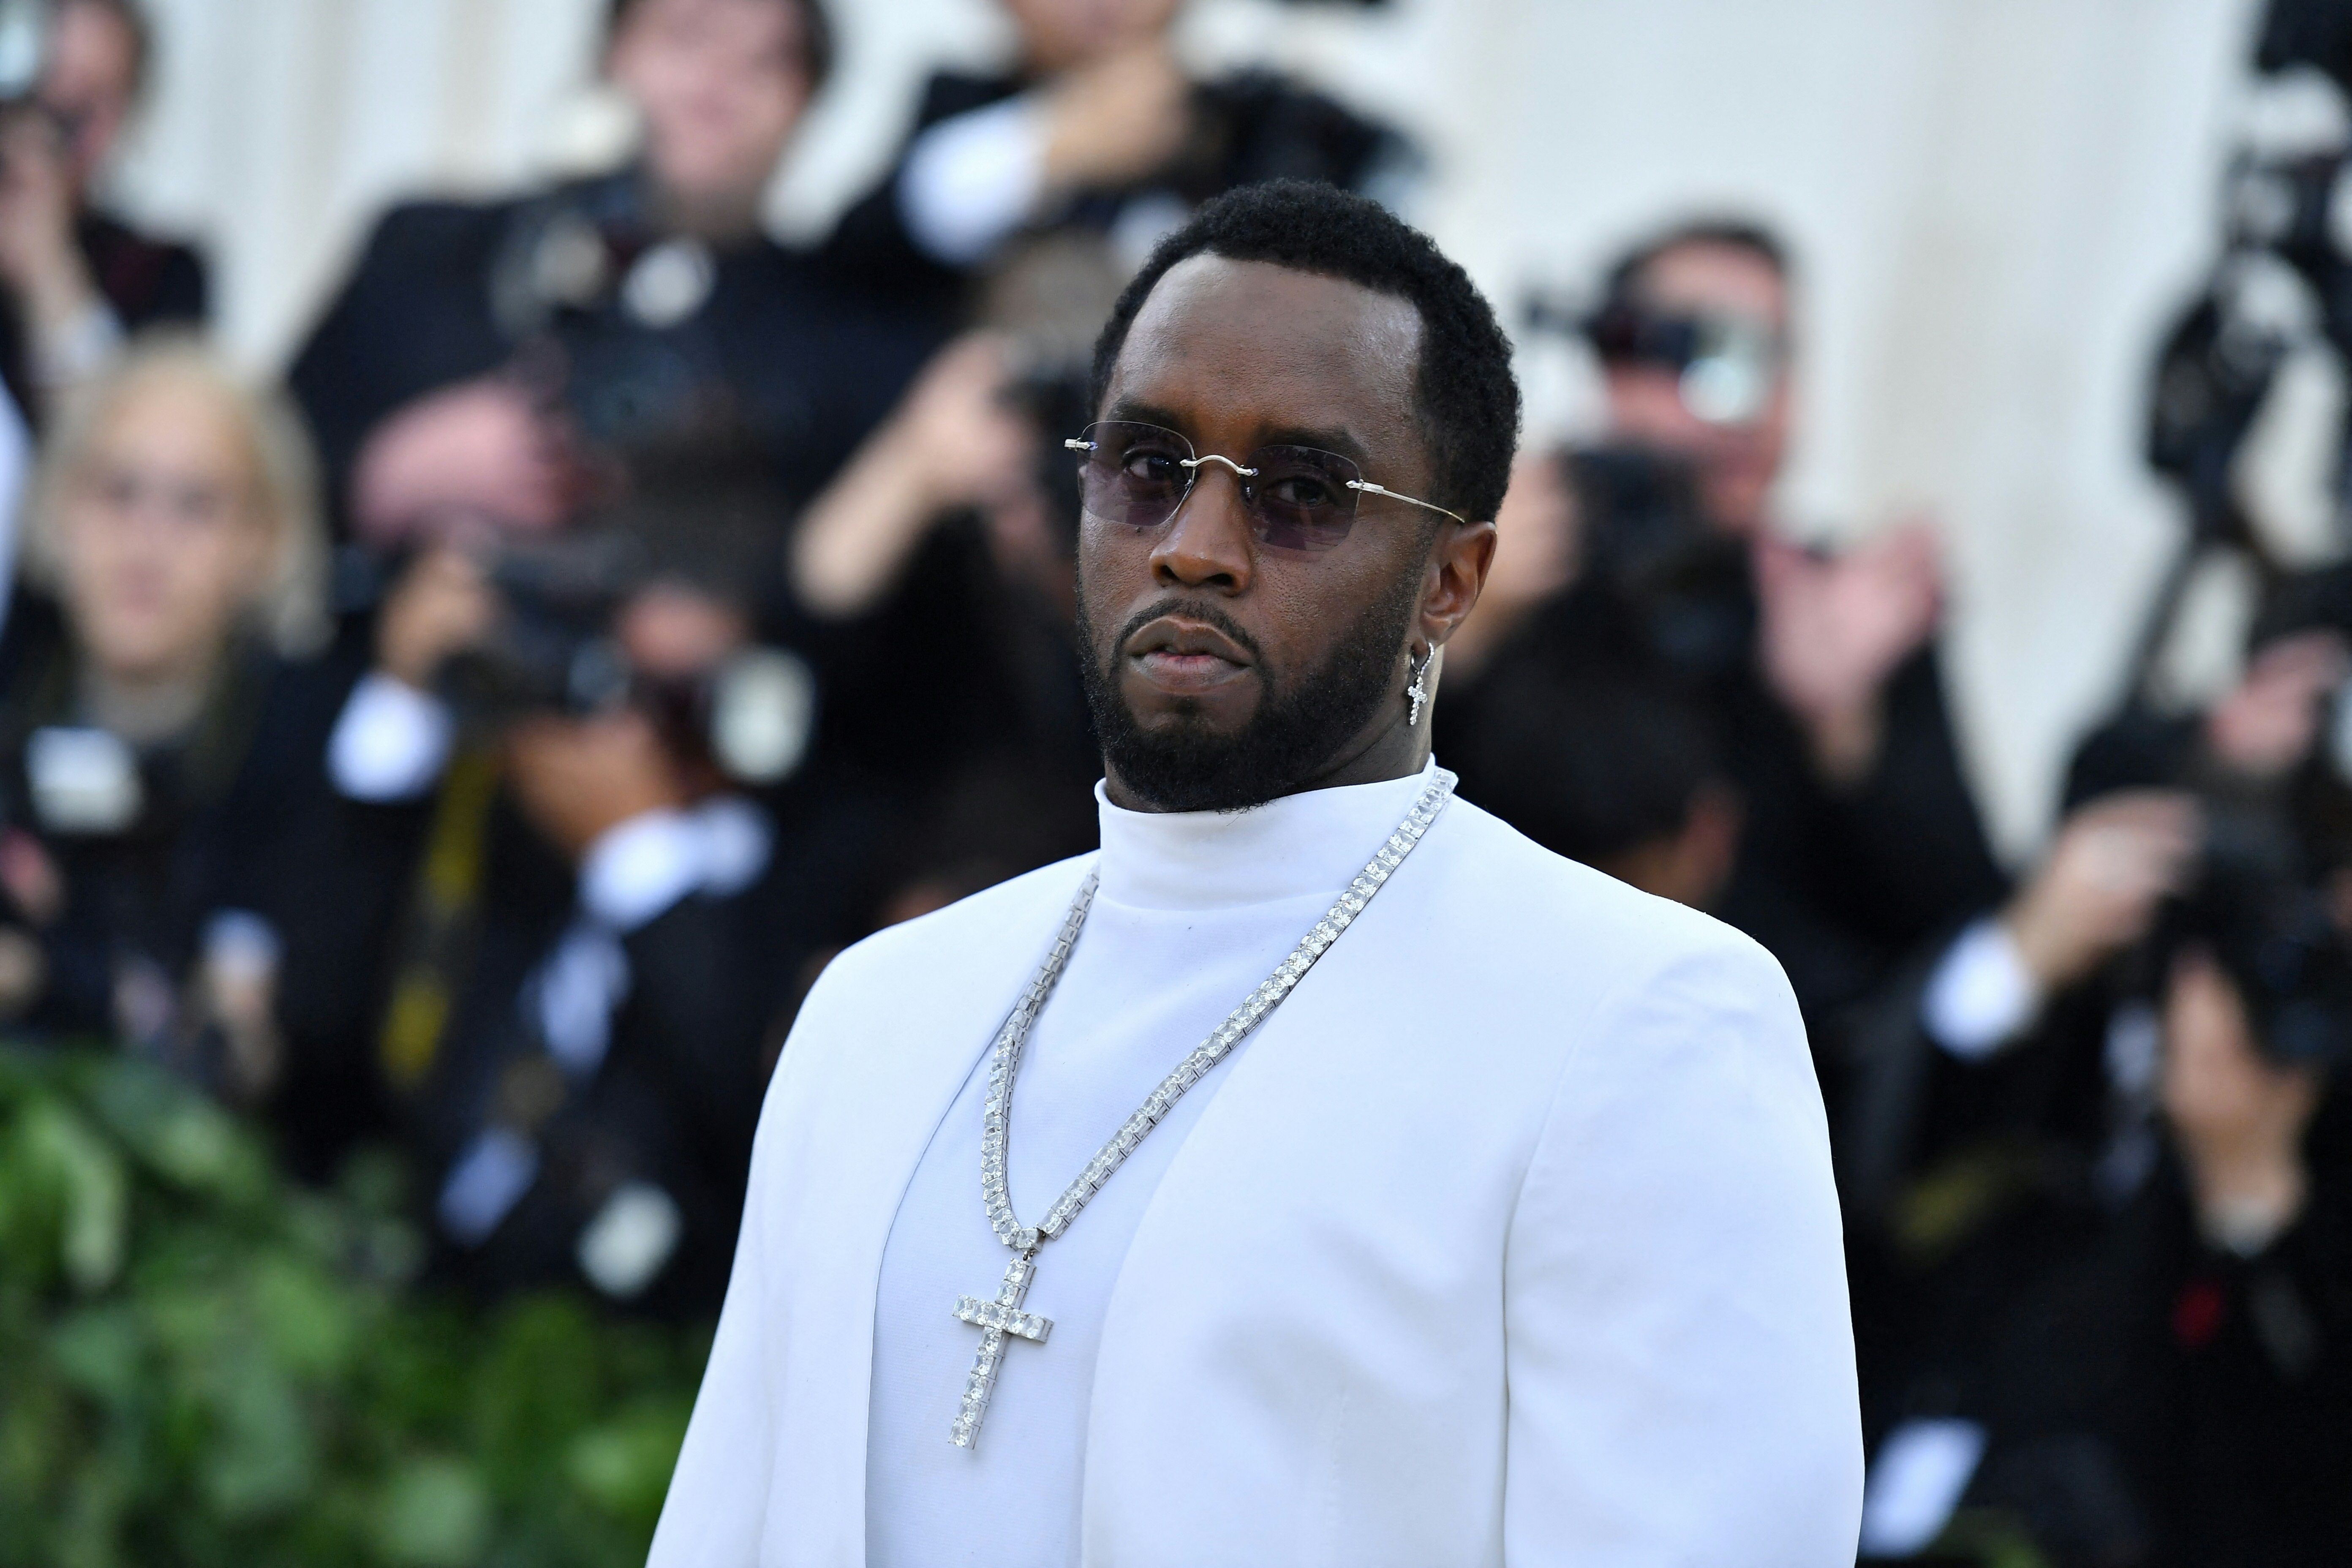 Sean ‘Diddy' Combs accused of sexual harassment and assault by producer on his latest album